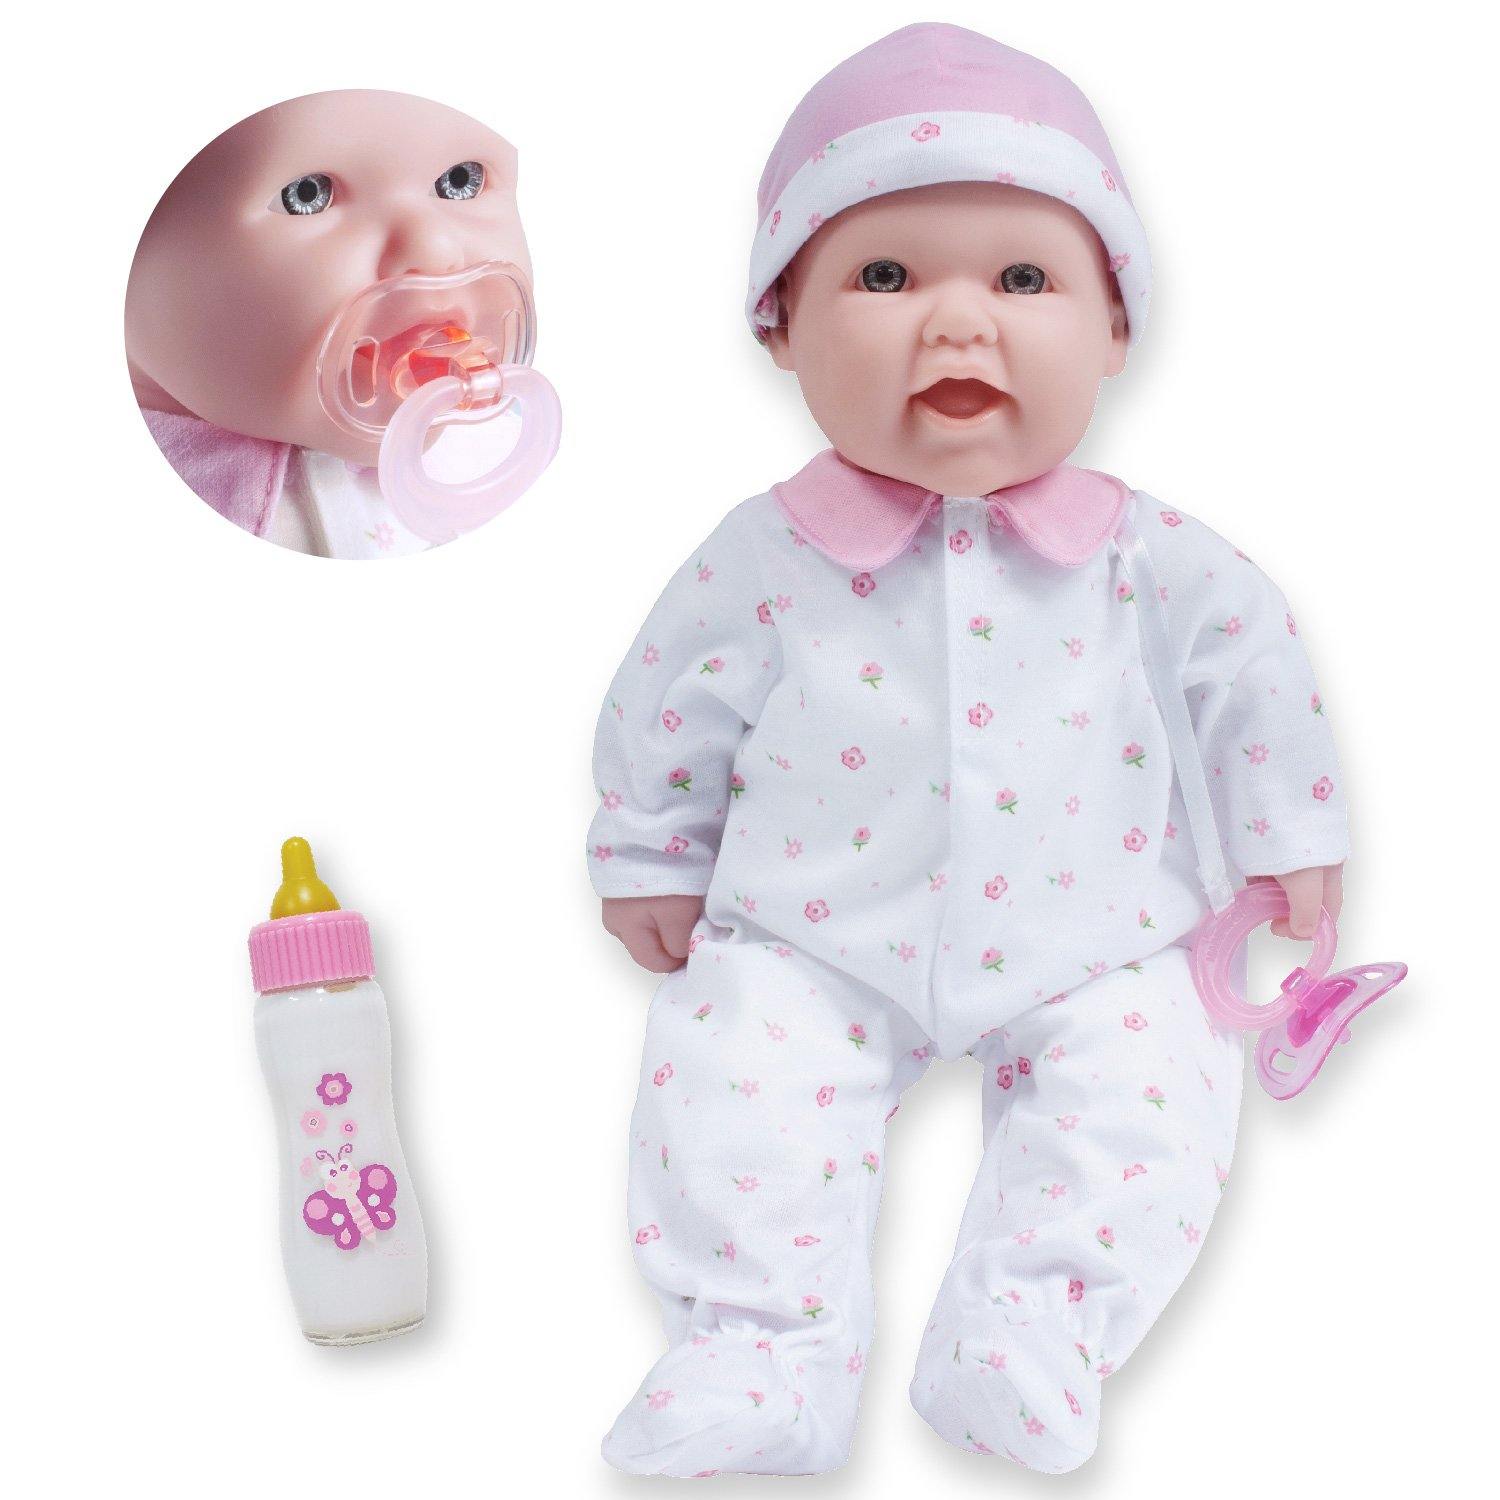 Picture of La Baby 16 in. Soft Body Baby Doll - Realistic Features in Pink